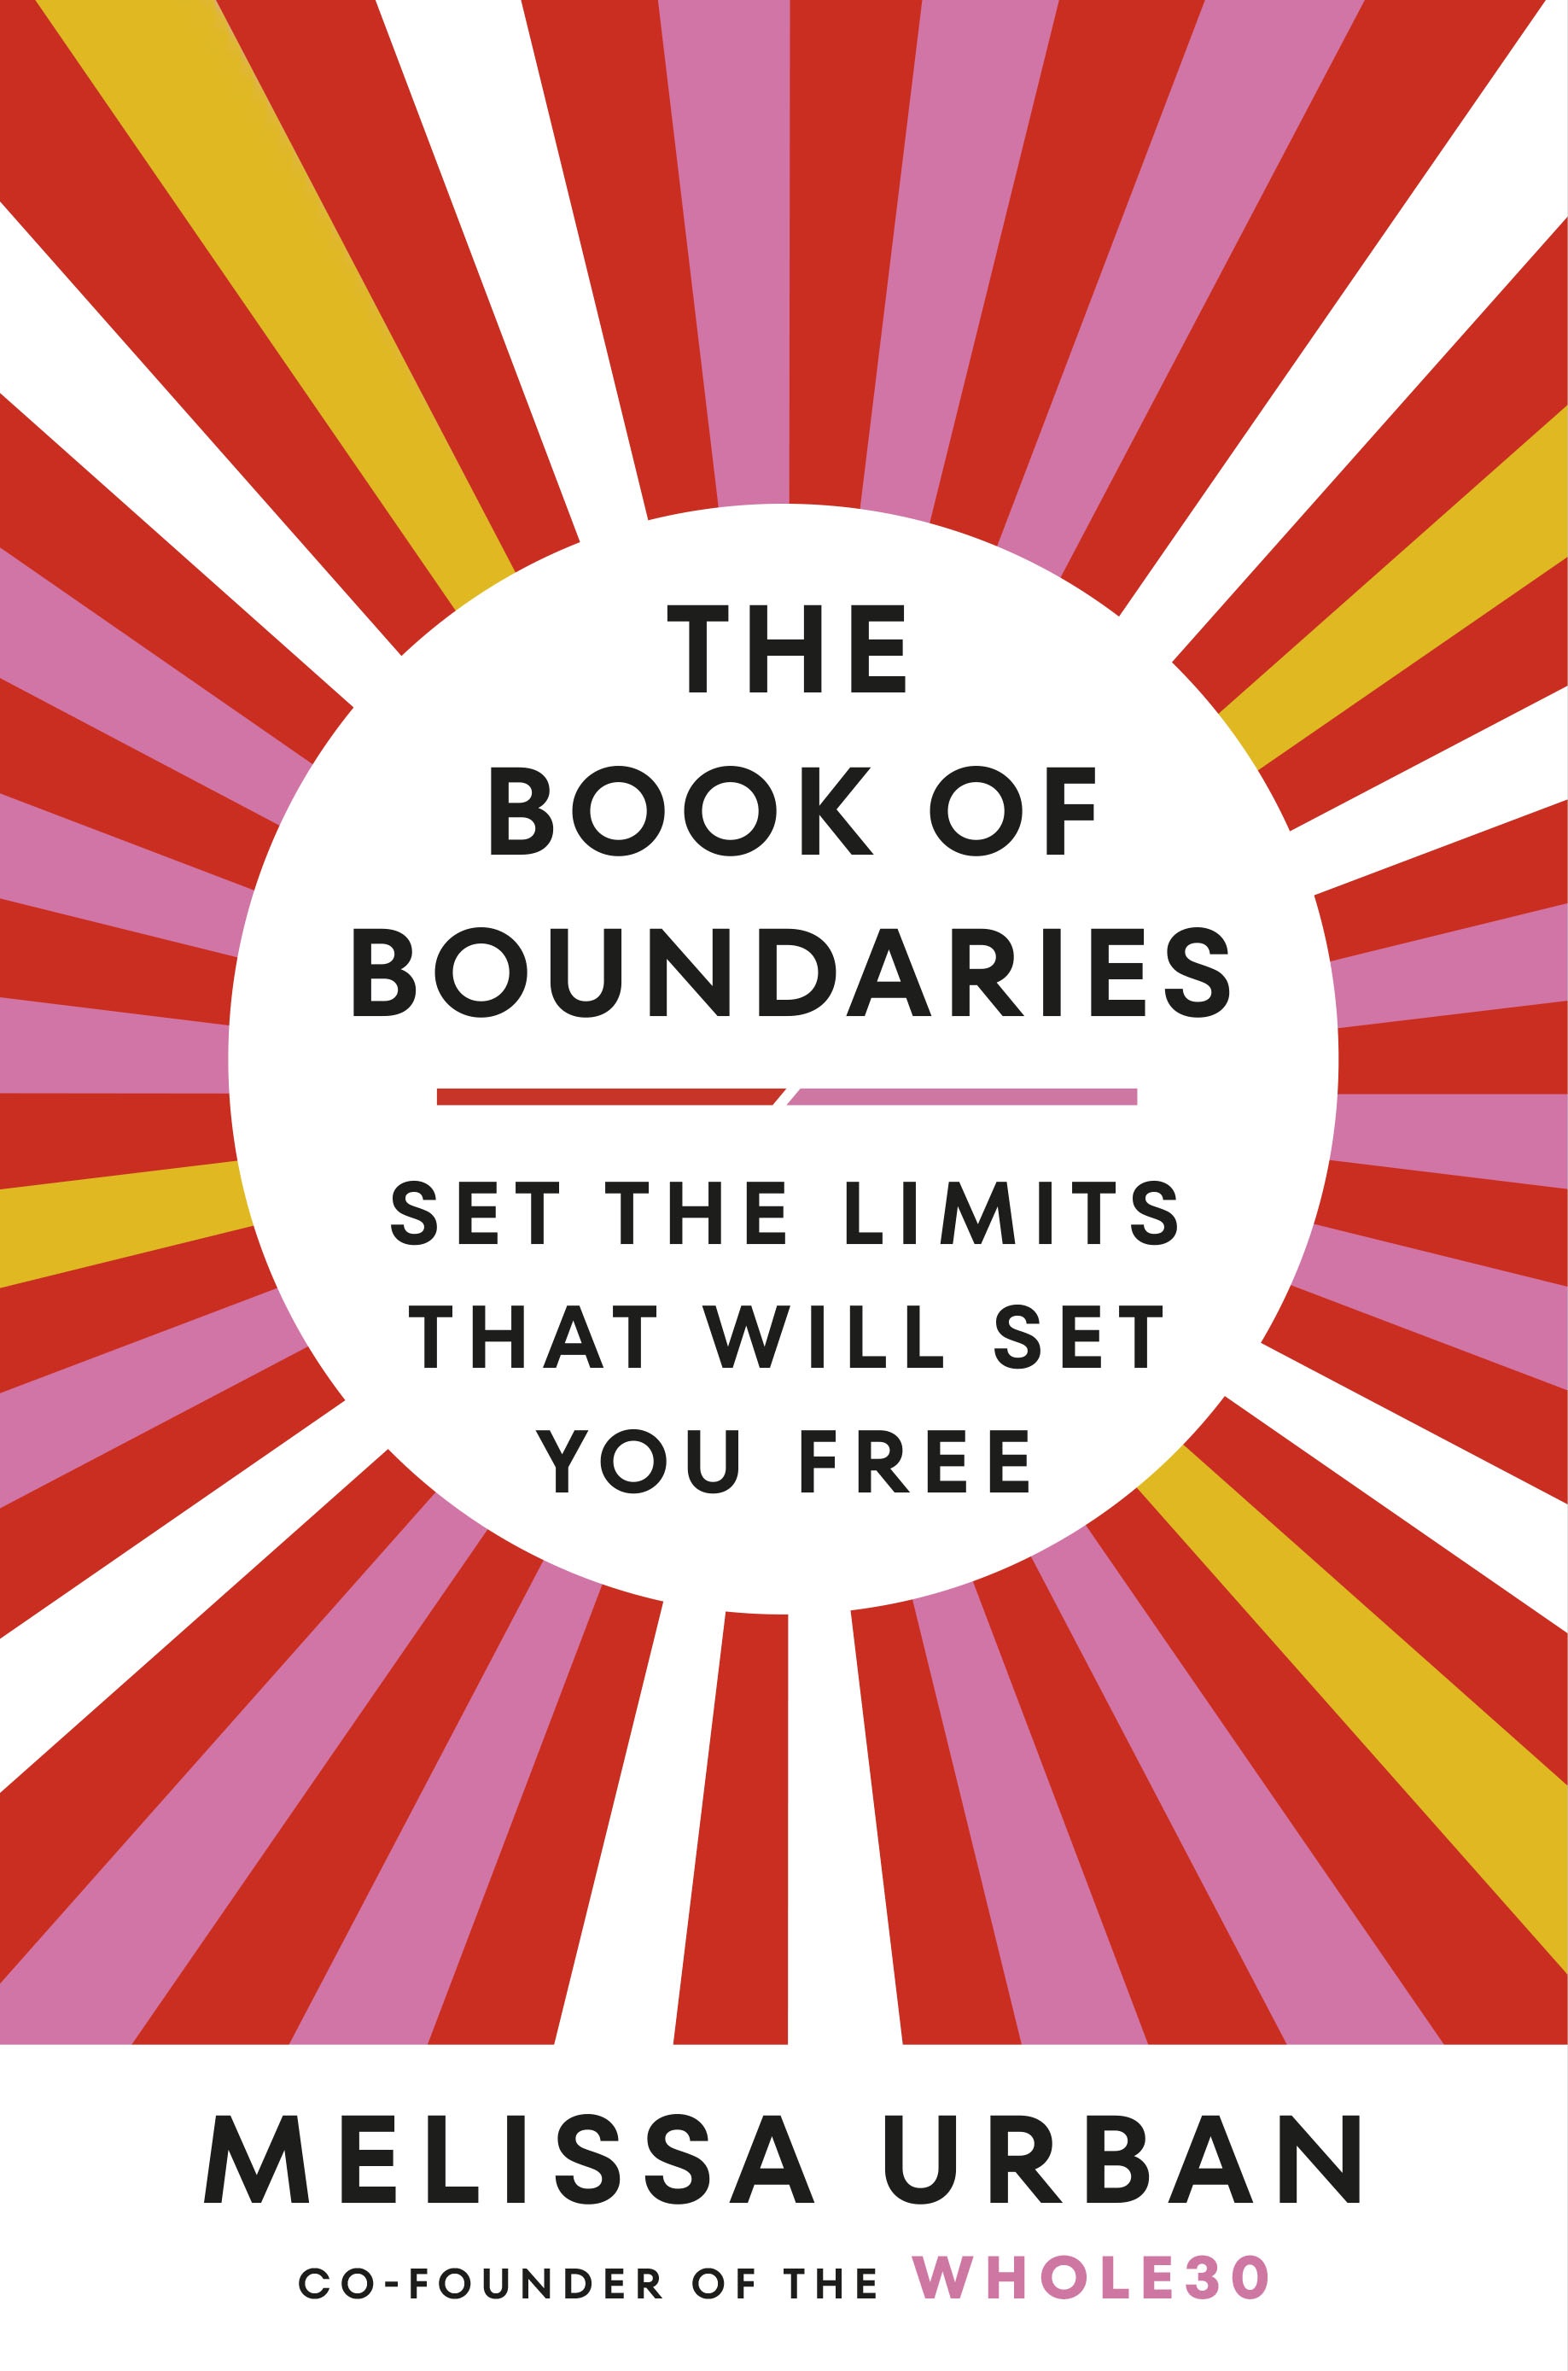 In-Person Event with Melissa Urban/The Book of Boundaries